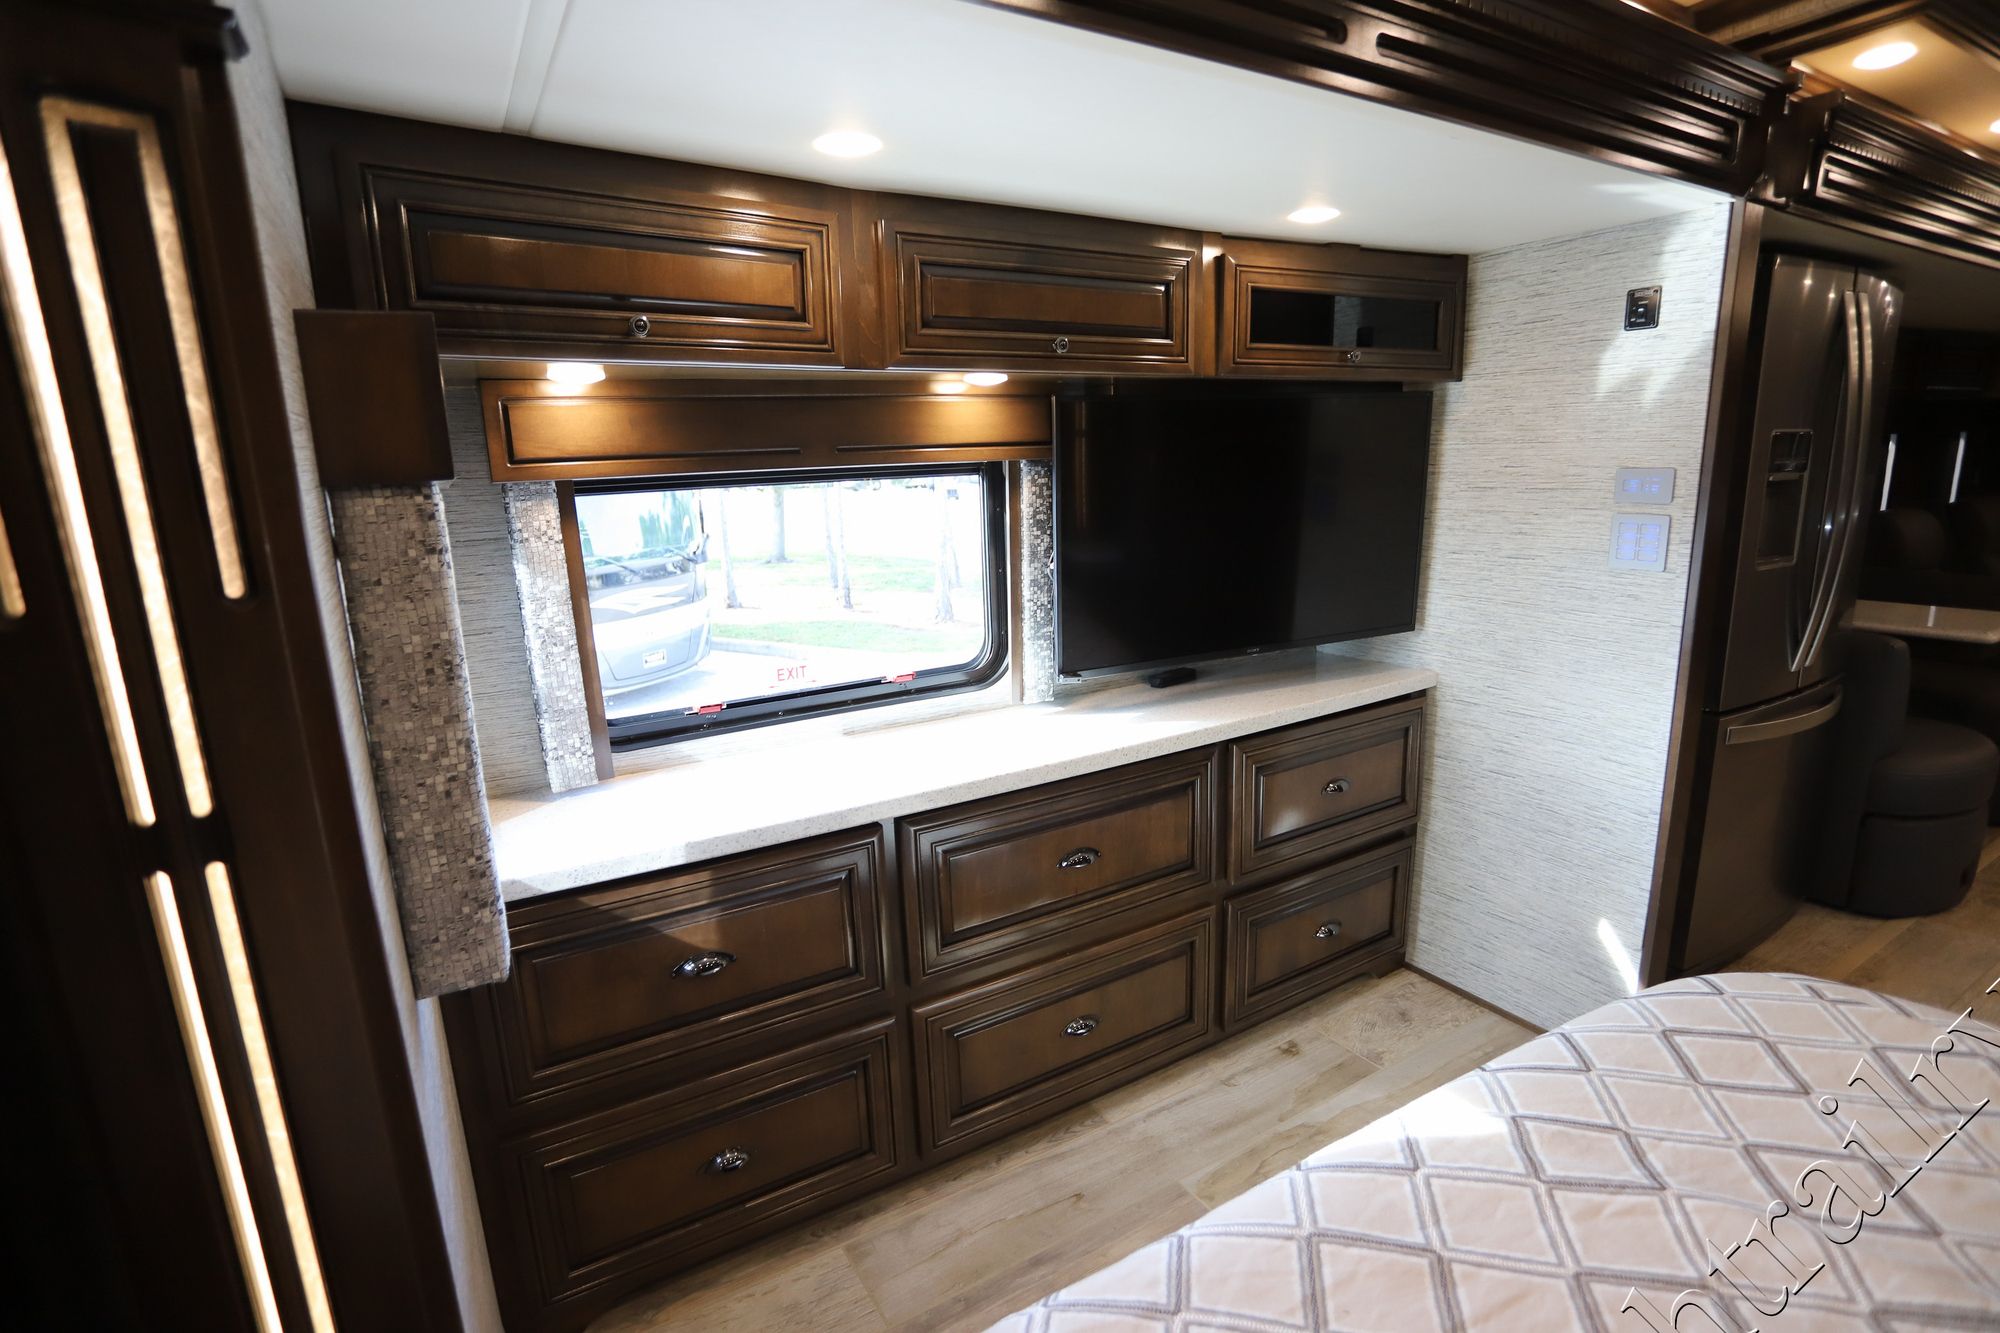 Used 2019 Newmar Dutch Star 4362 Class A  For Sale